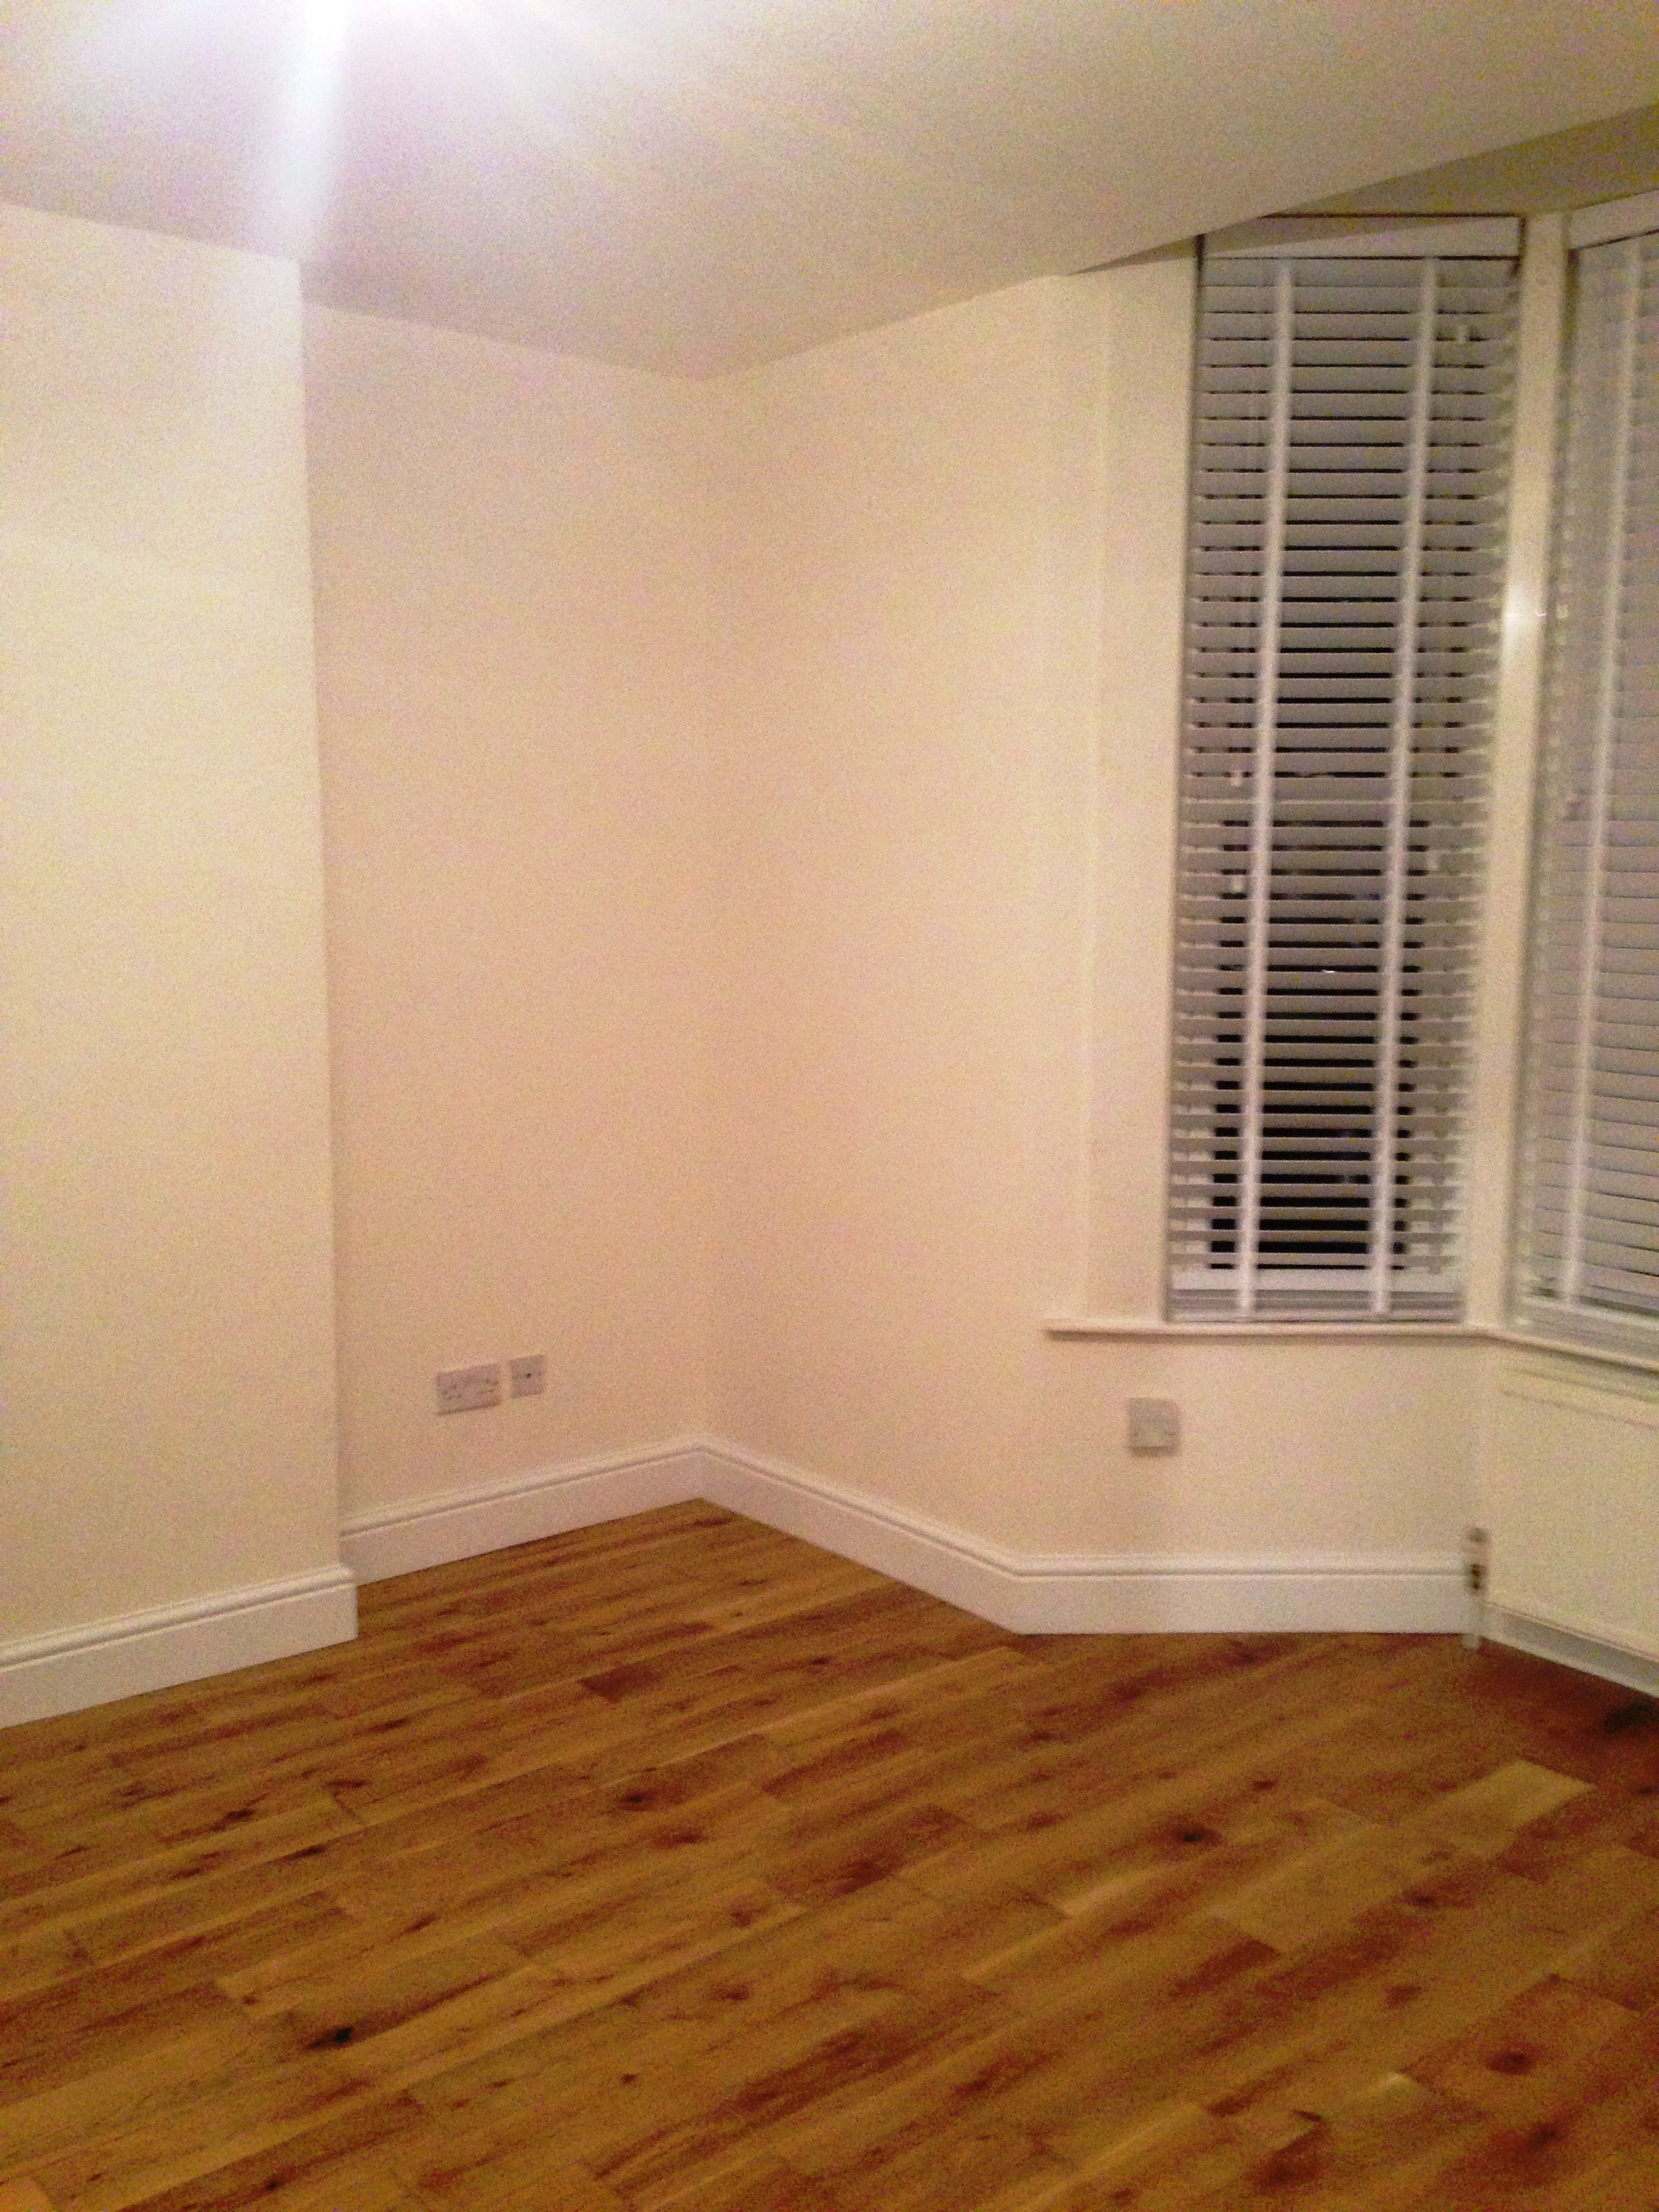 Well located 2 bedroom newly refurbished with high standard.